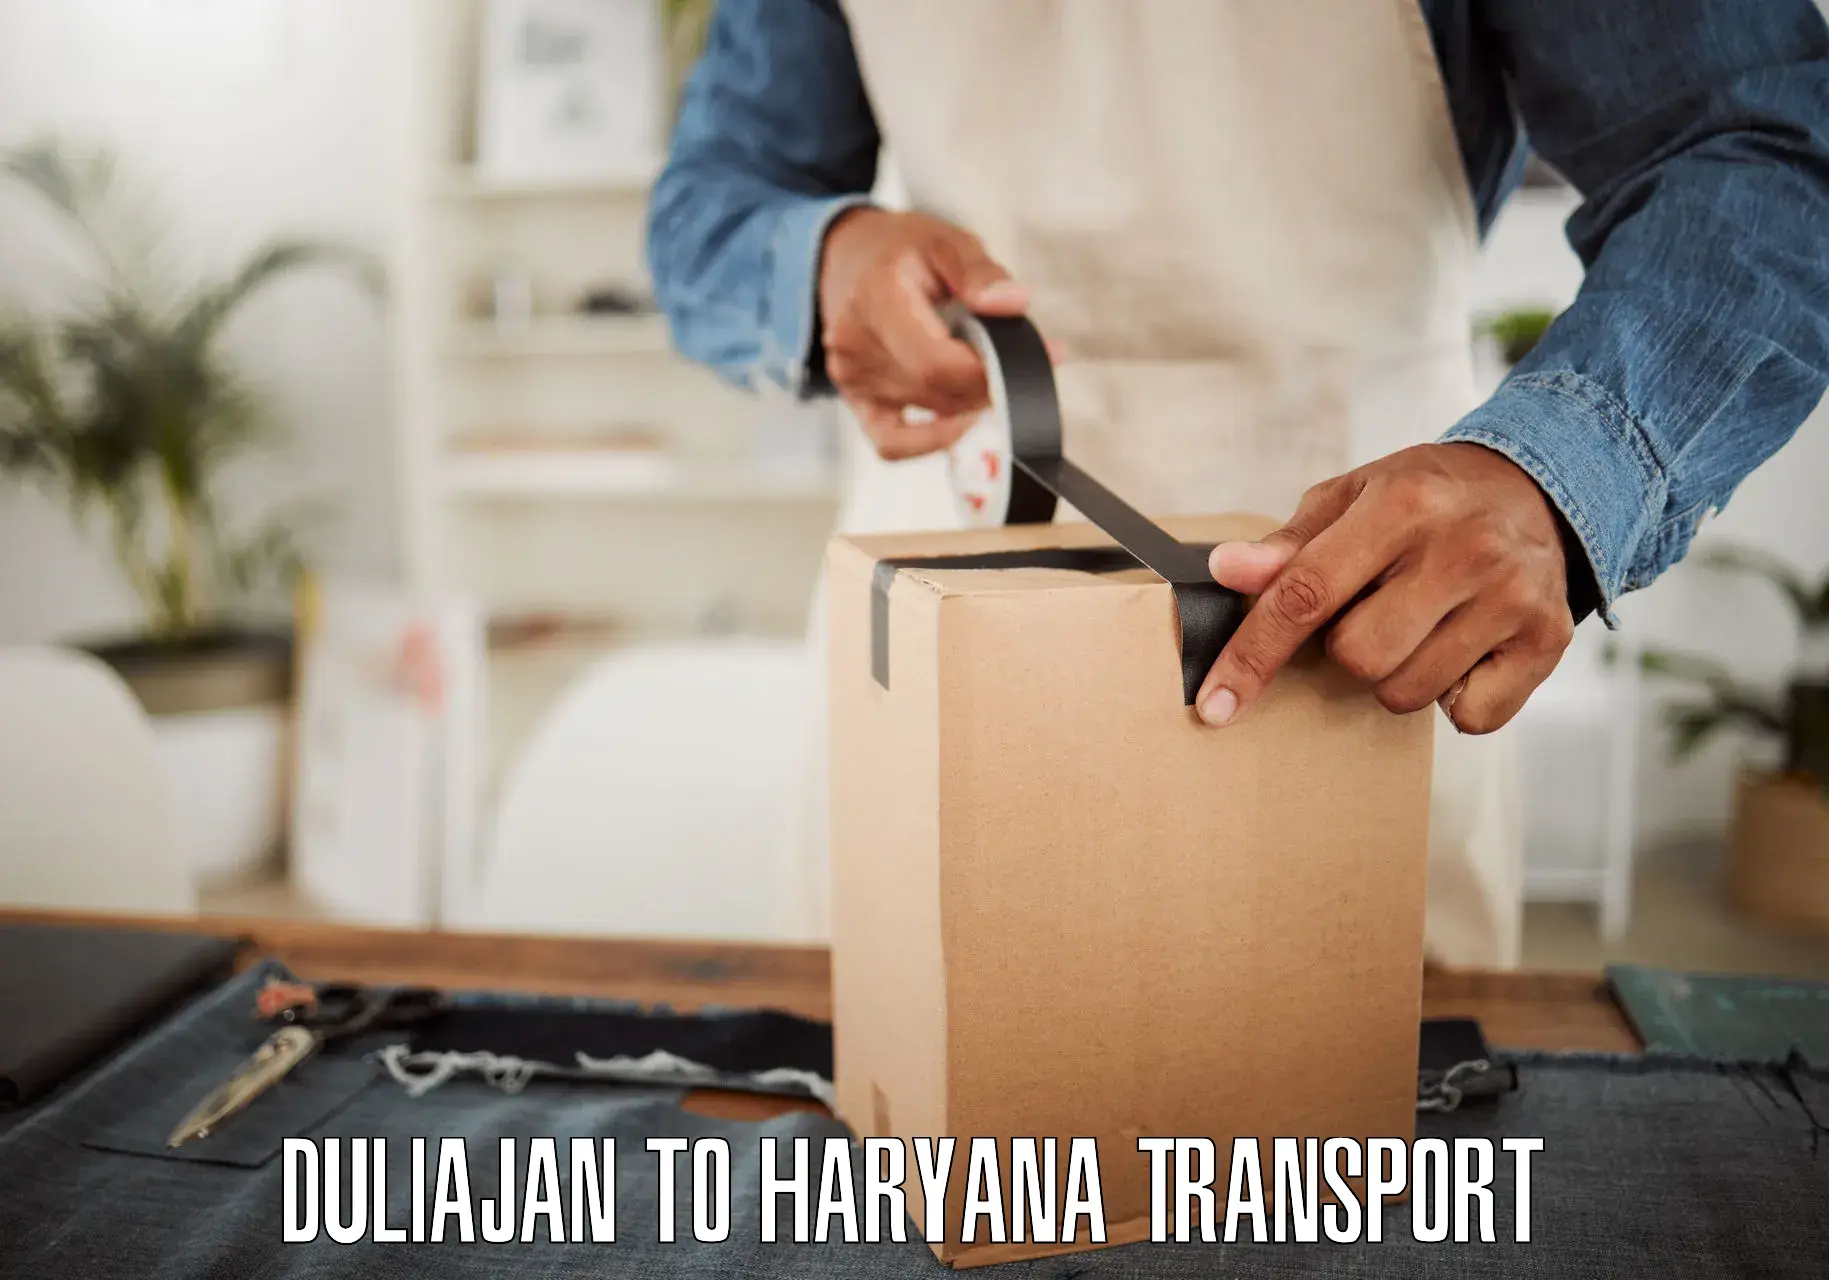 Commercial transport service Duliajan to Gurgaon